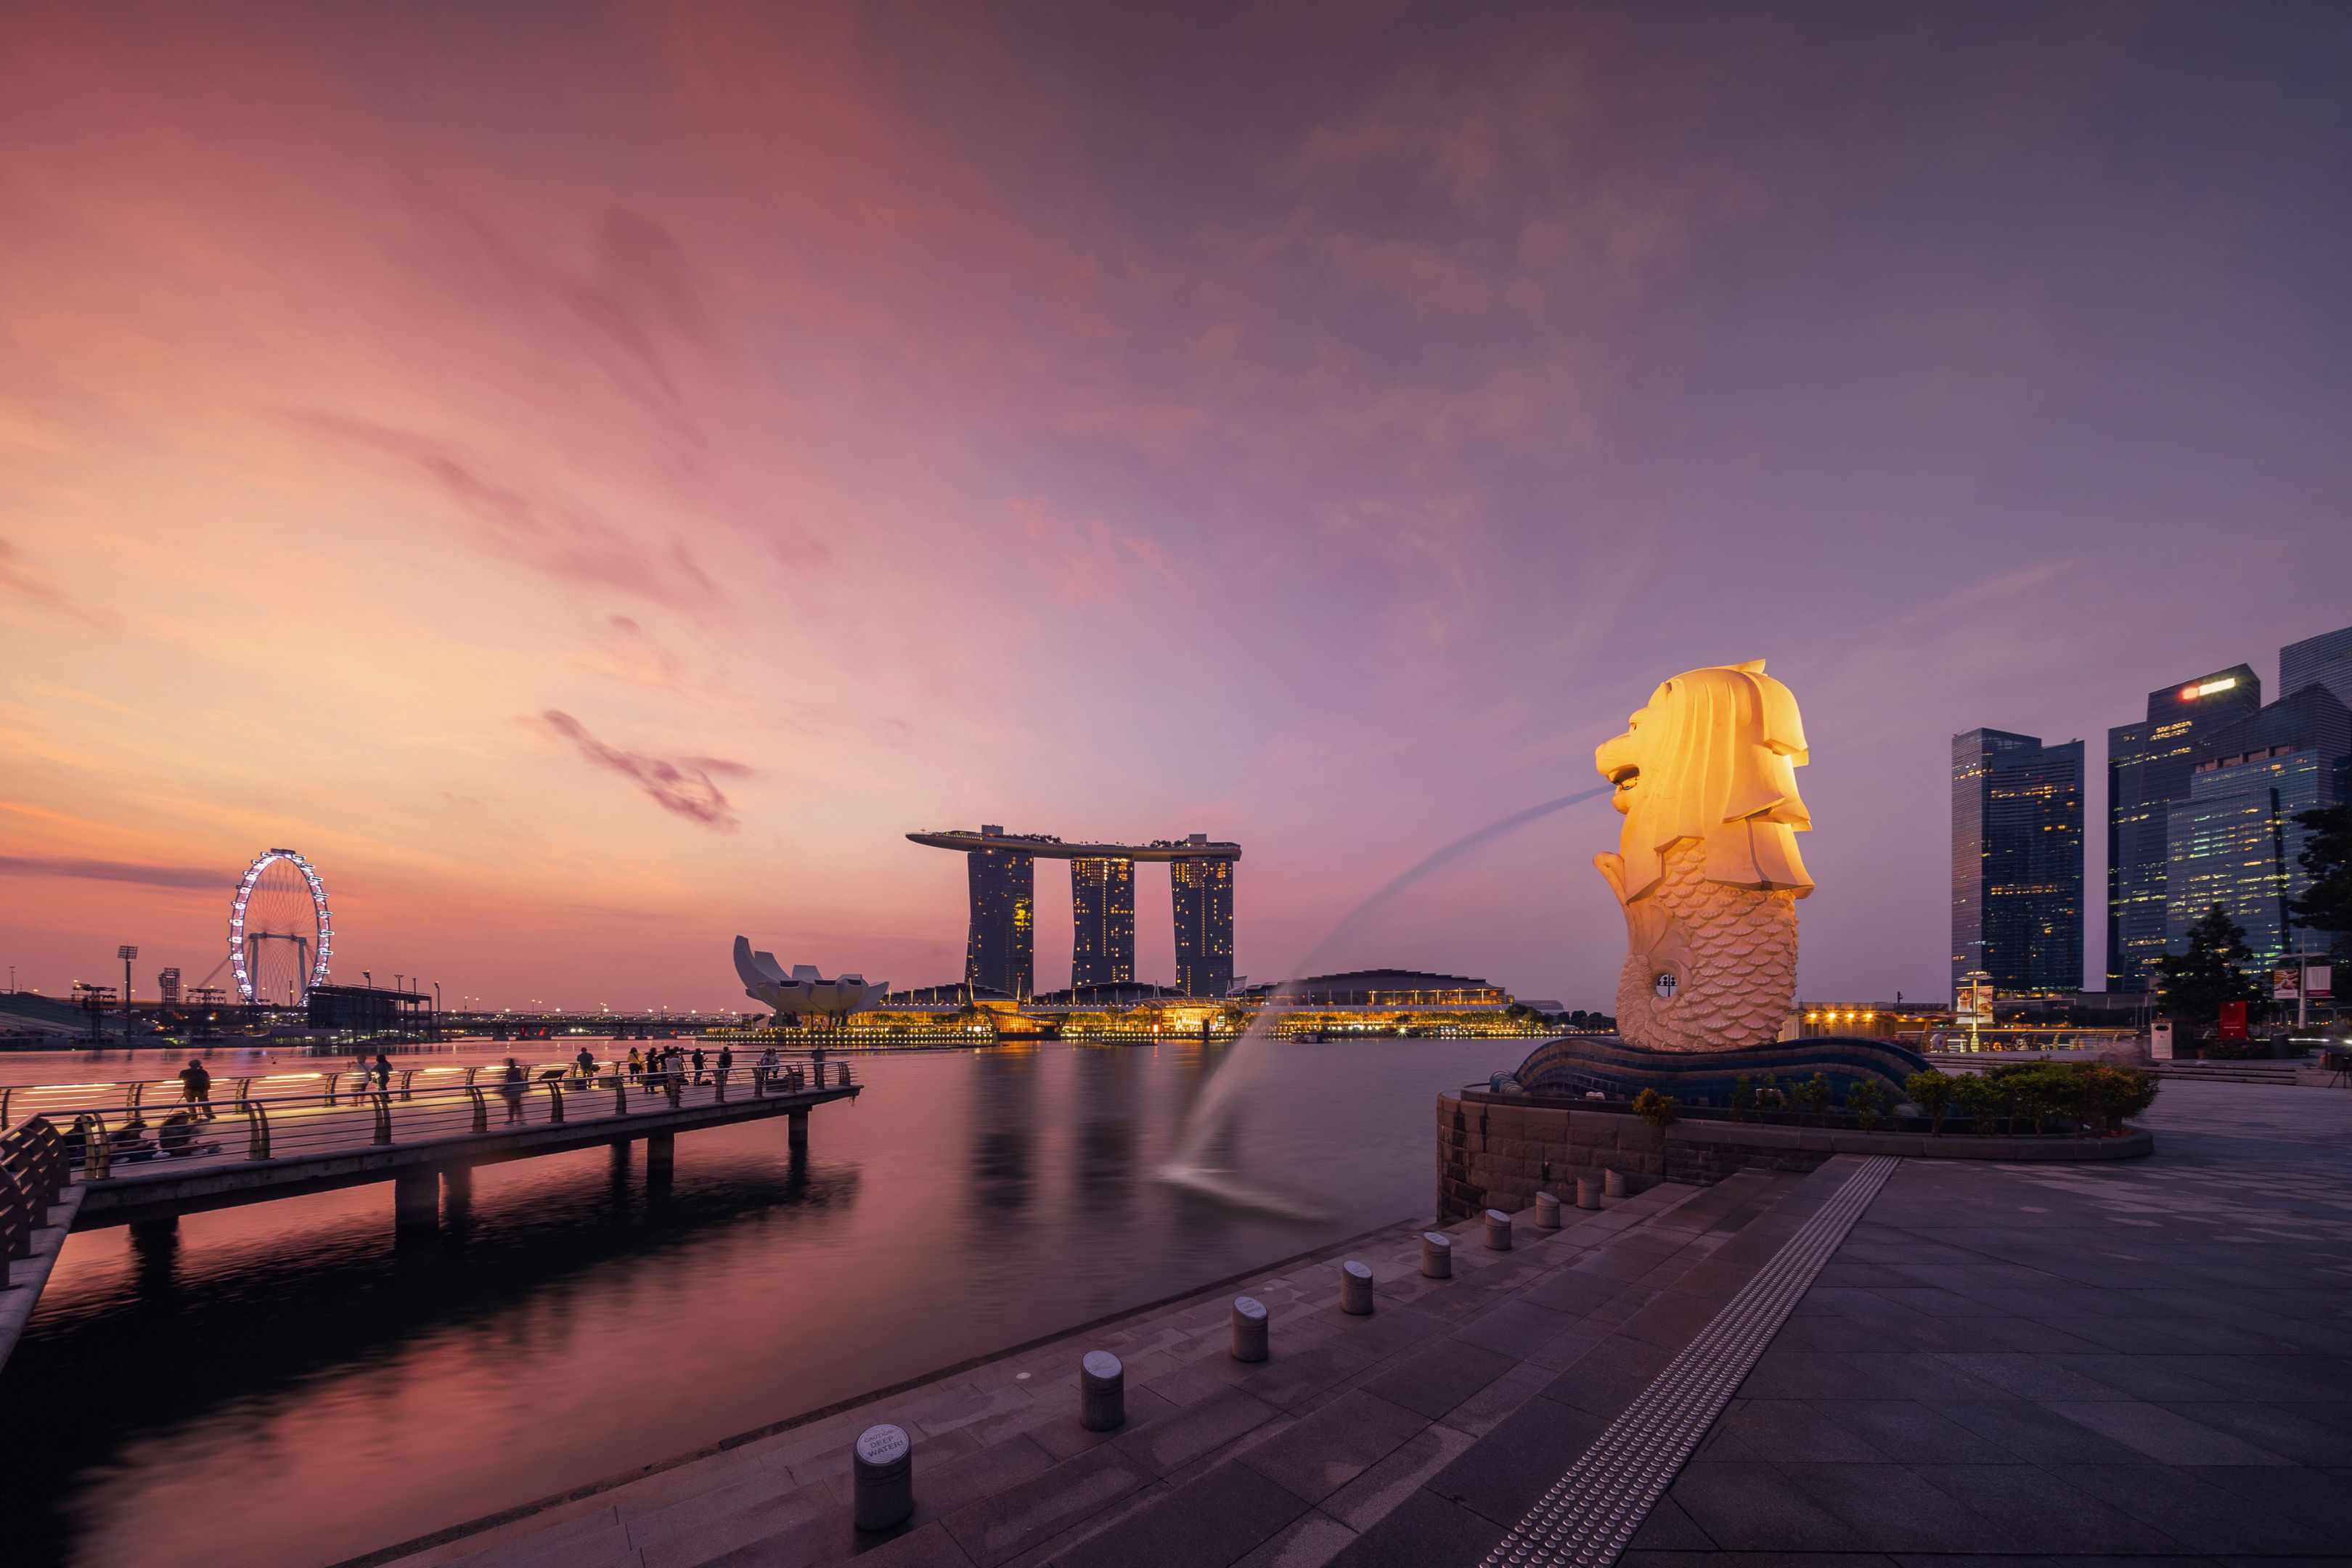 Singapore City - July 29, 2018 : Merlion and Marina Bay Sands at sunrise with Singapore Flyer and twilight sky.